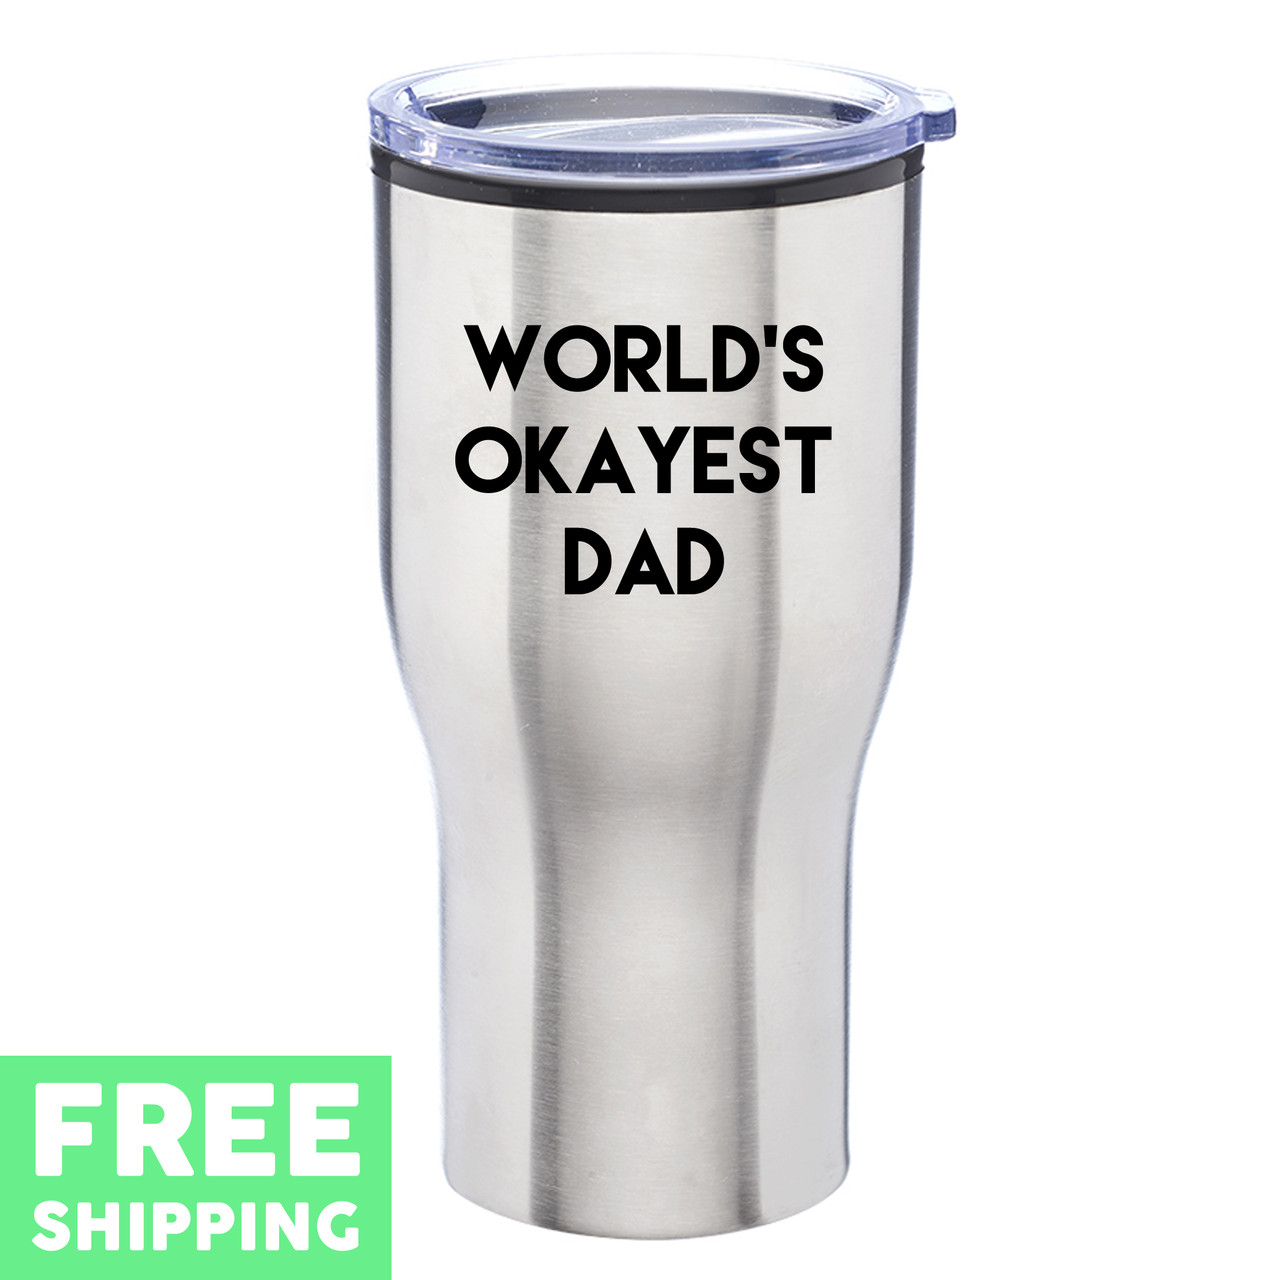 https://cdn11.bigcommerce.com/s-pza6oiin/images/stencil/1280x1280/products/9934/17375/worldsokayestdad_28_oz_Challenger_Stainless_Steel_Travel_Mugs_silver_3583_freeshipping__43527.1591392696.jpg?c=2?imbypass=on